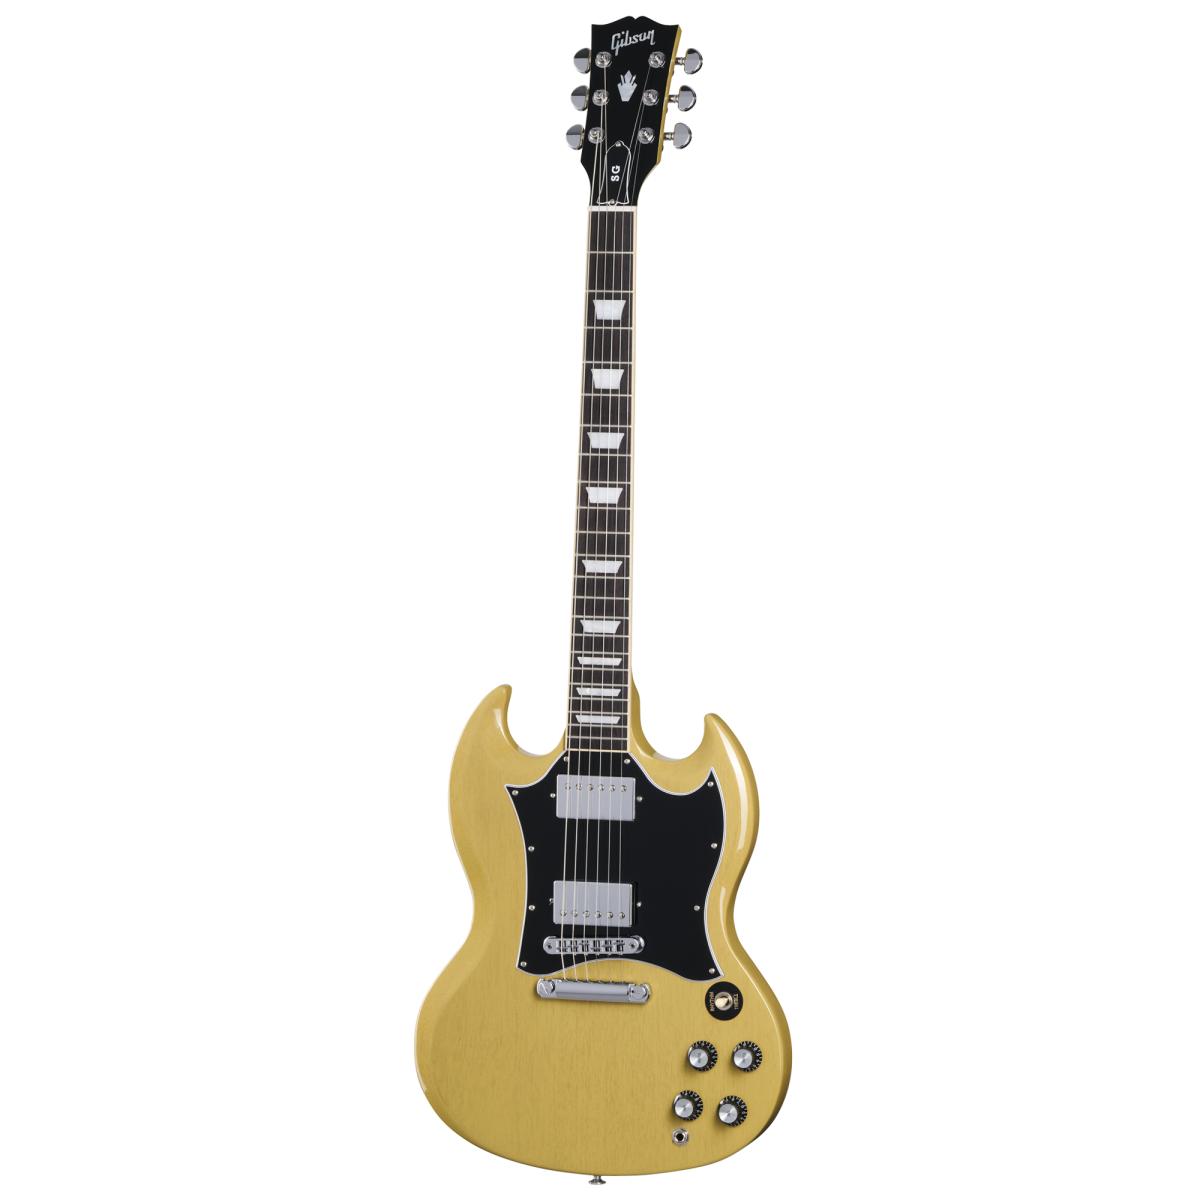 Gibson SG Standard Electric Guitar TV Yellow w/ Hardcase - SGS00TVCH1